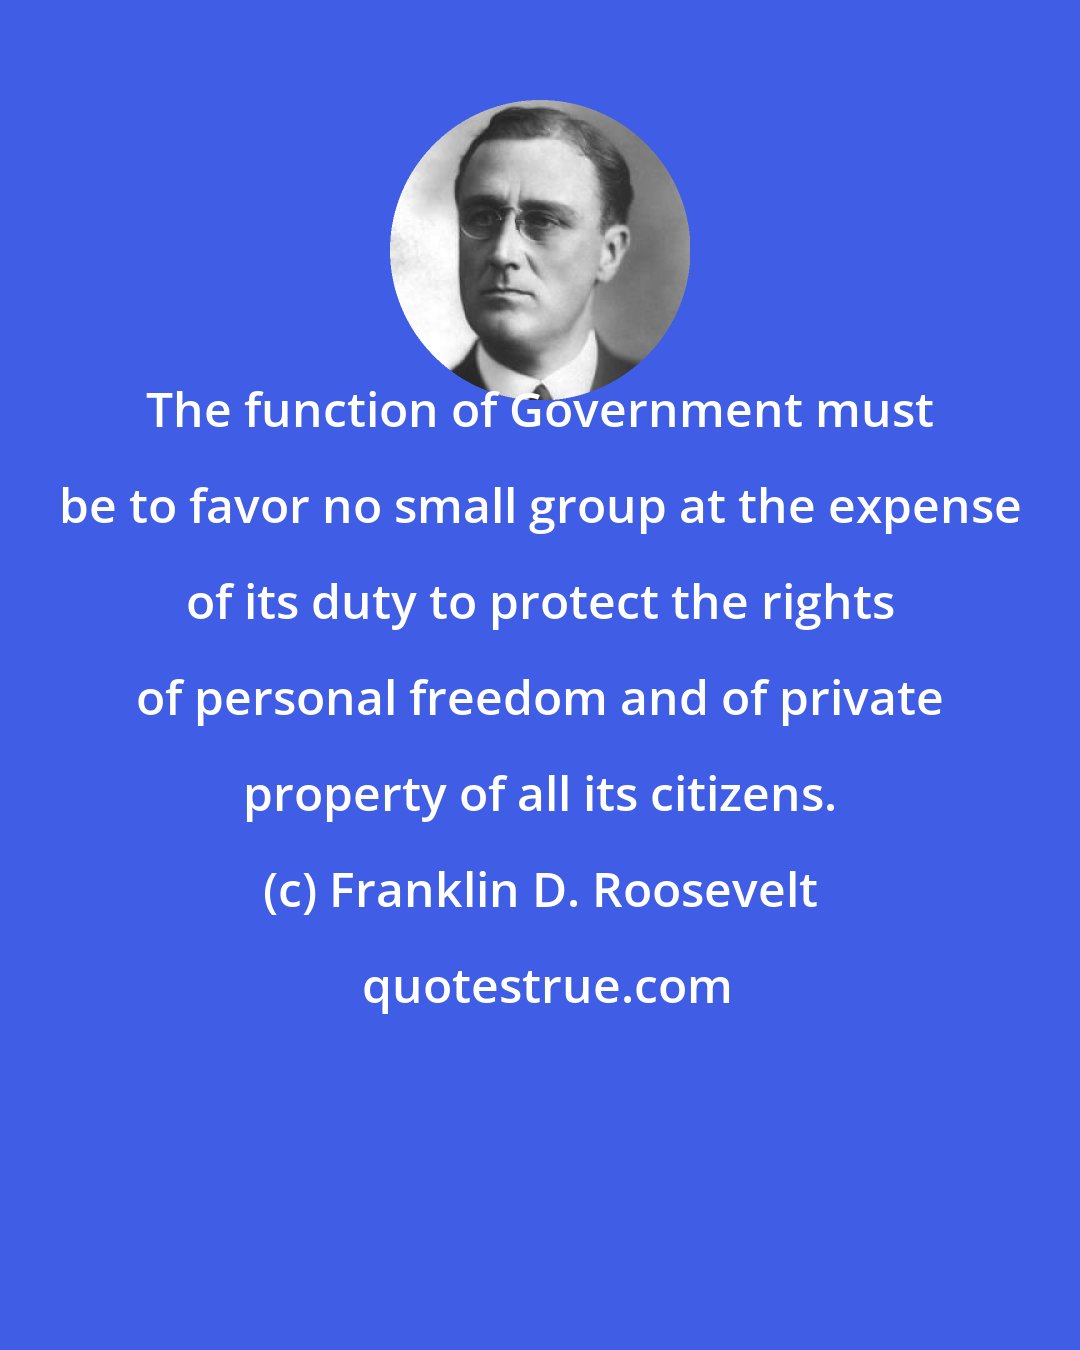 Franklin D. Roosevelt: The function of Government must be to favor no small group at the expense of its duty to protect the rights of personal freedom and of private property of all its citizens.